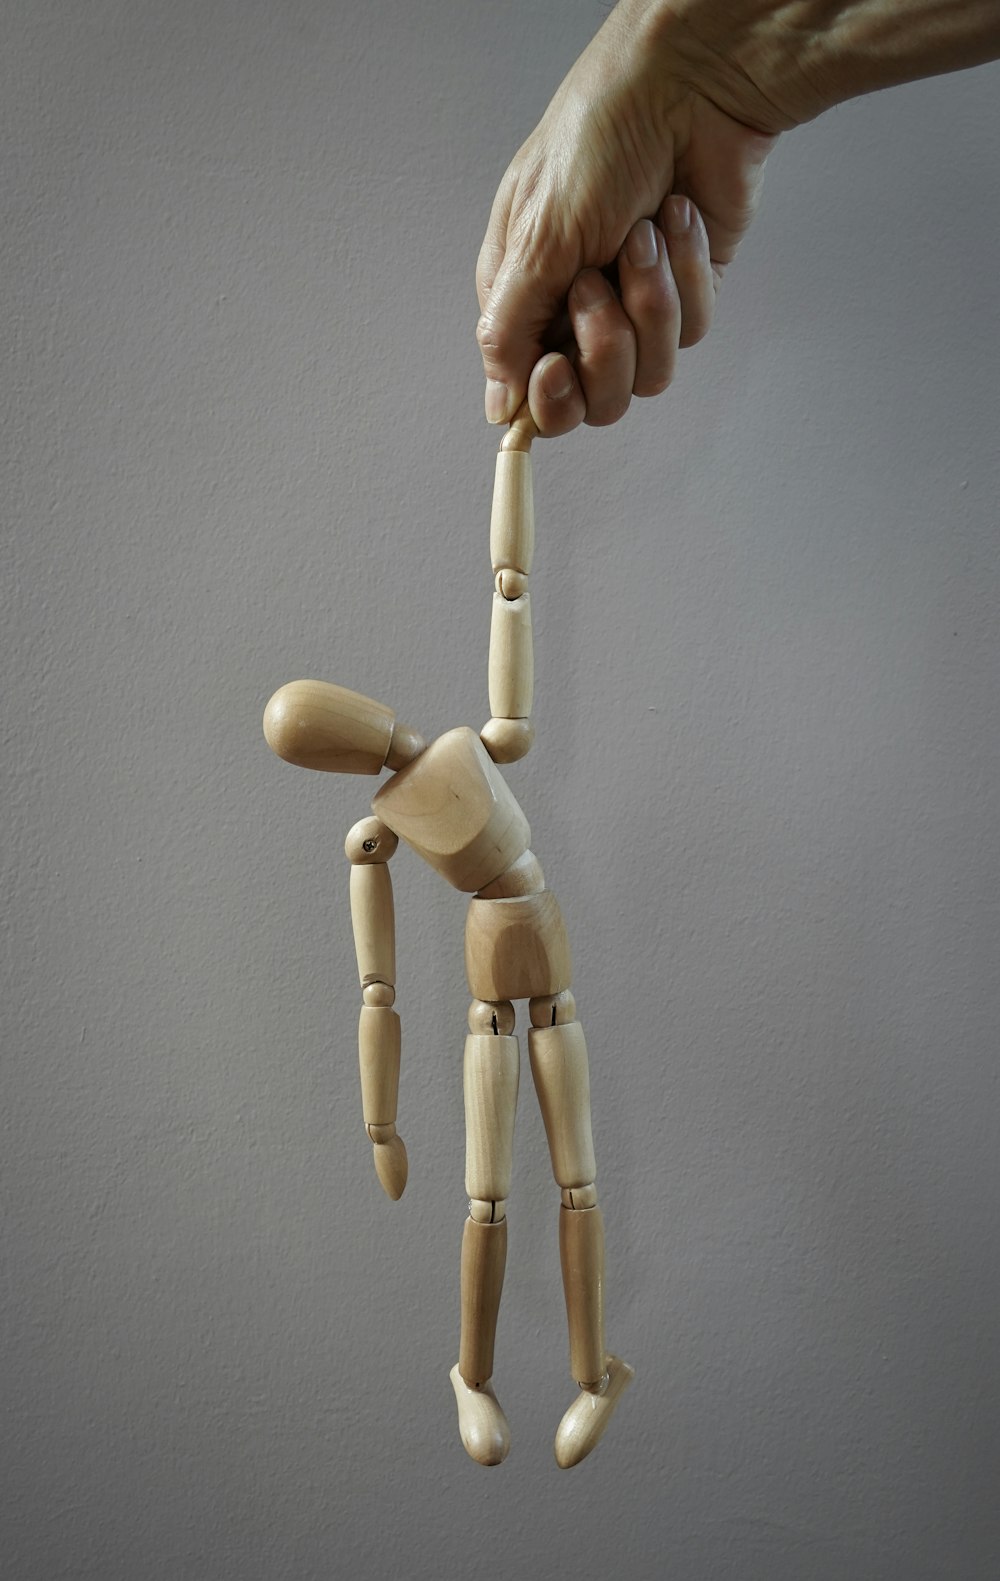 a wooden dummy being held by a hand